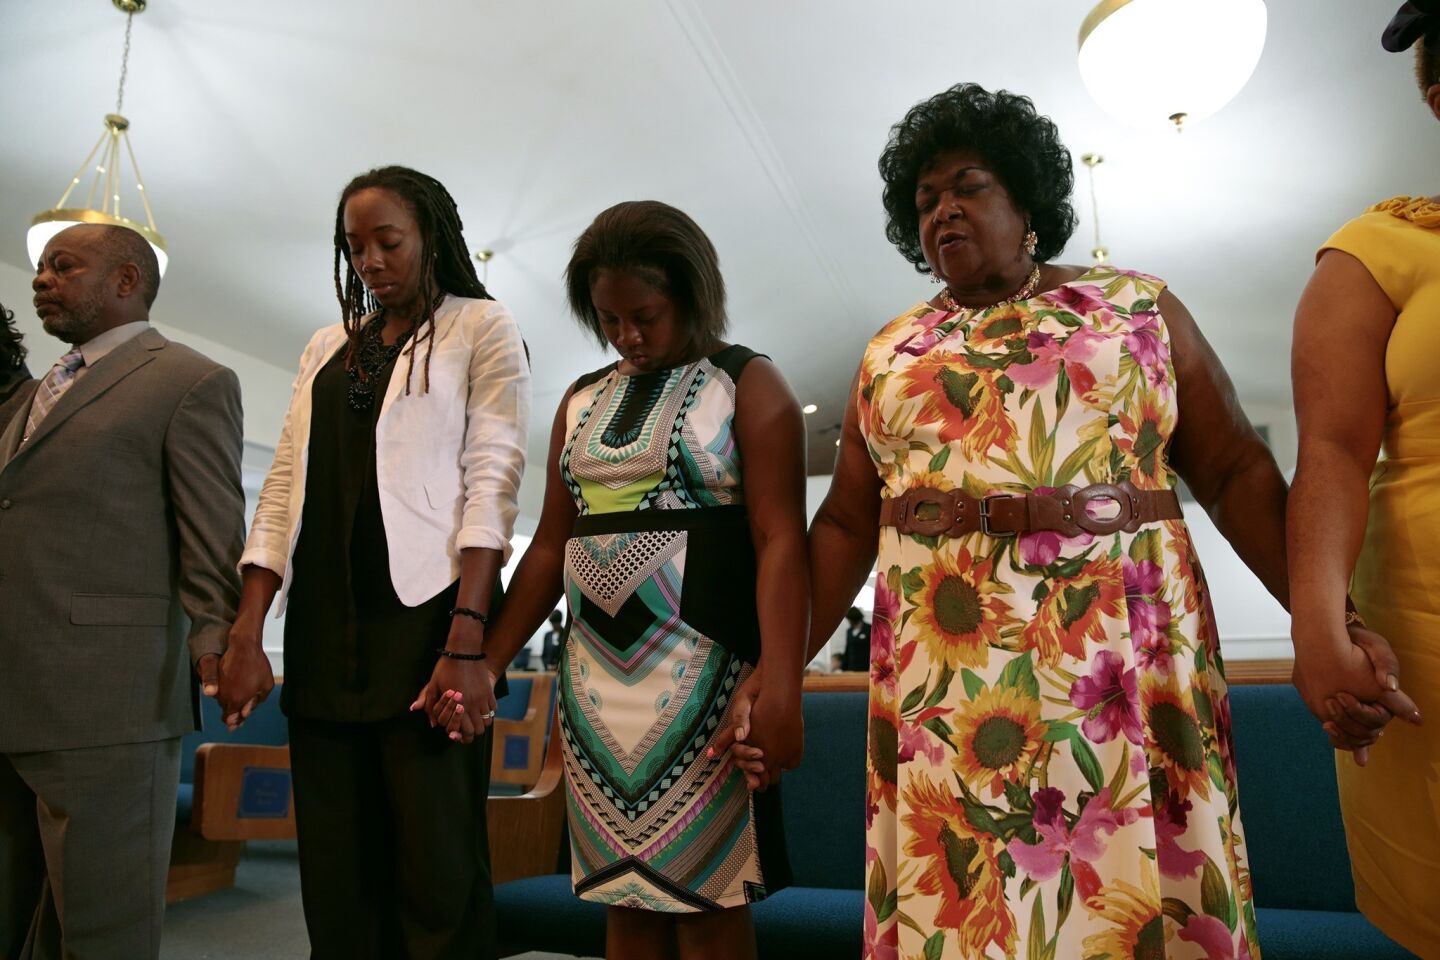 On the day after George Zimmerman was found not guilty, people gather in prayer at the First Shiloh Baptist Church in Sanford.